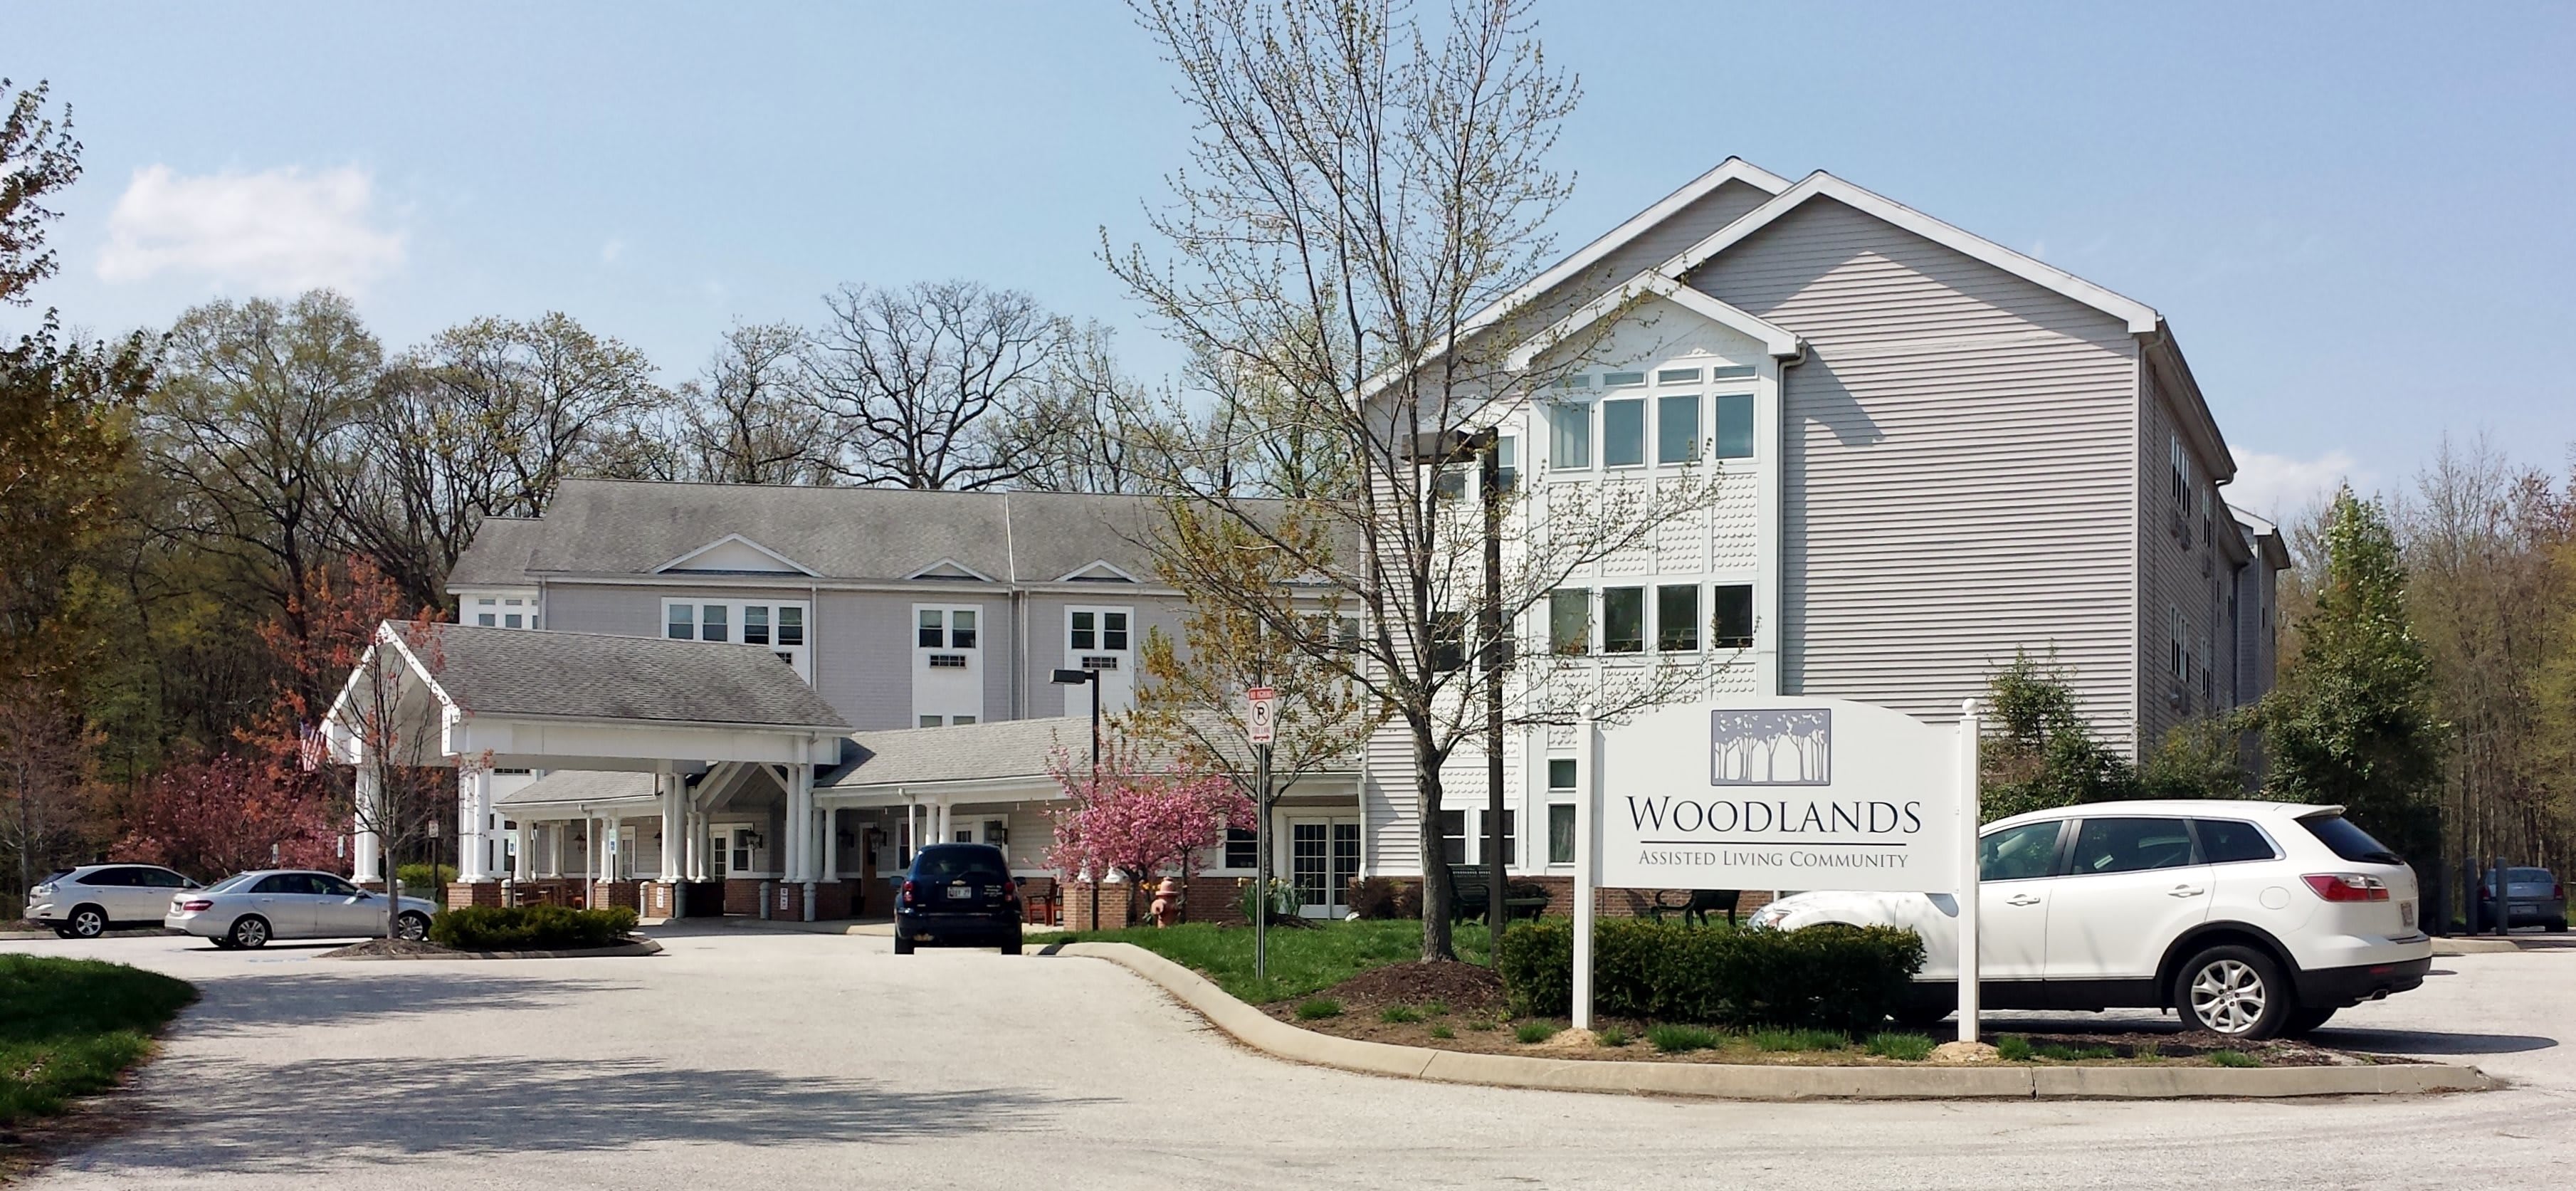 Woodlands Assisted Living community exterior